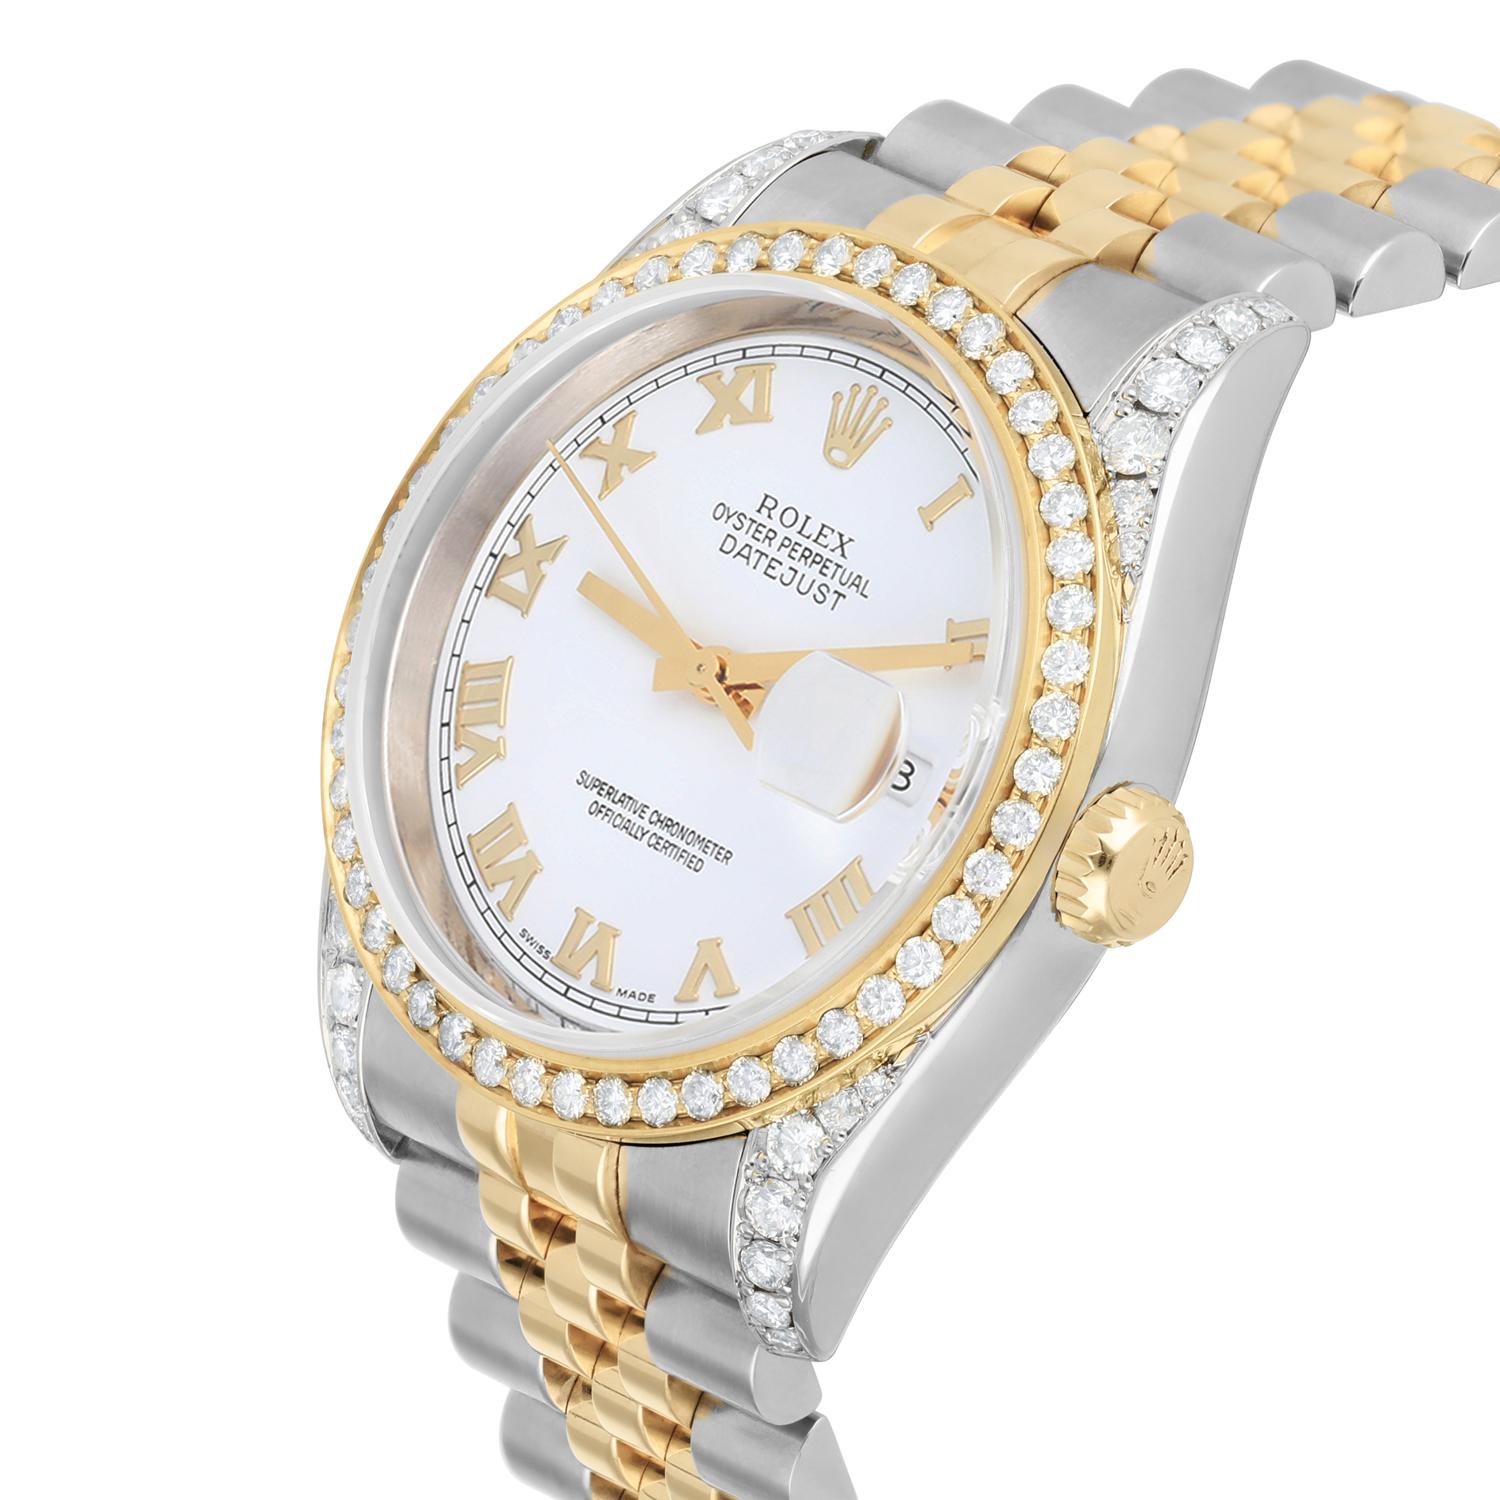 Rolex Datejust 36 Gold/Steel 116233 Diamond Bezel White Roman Dial Jubilee Band In Excellent Condition For Sale In New York, NY